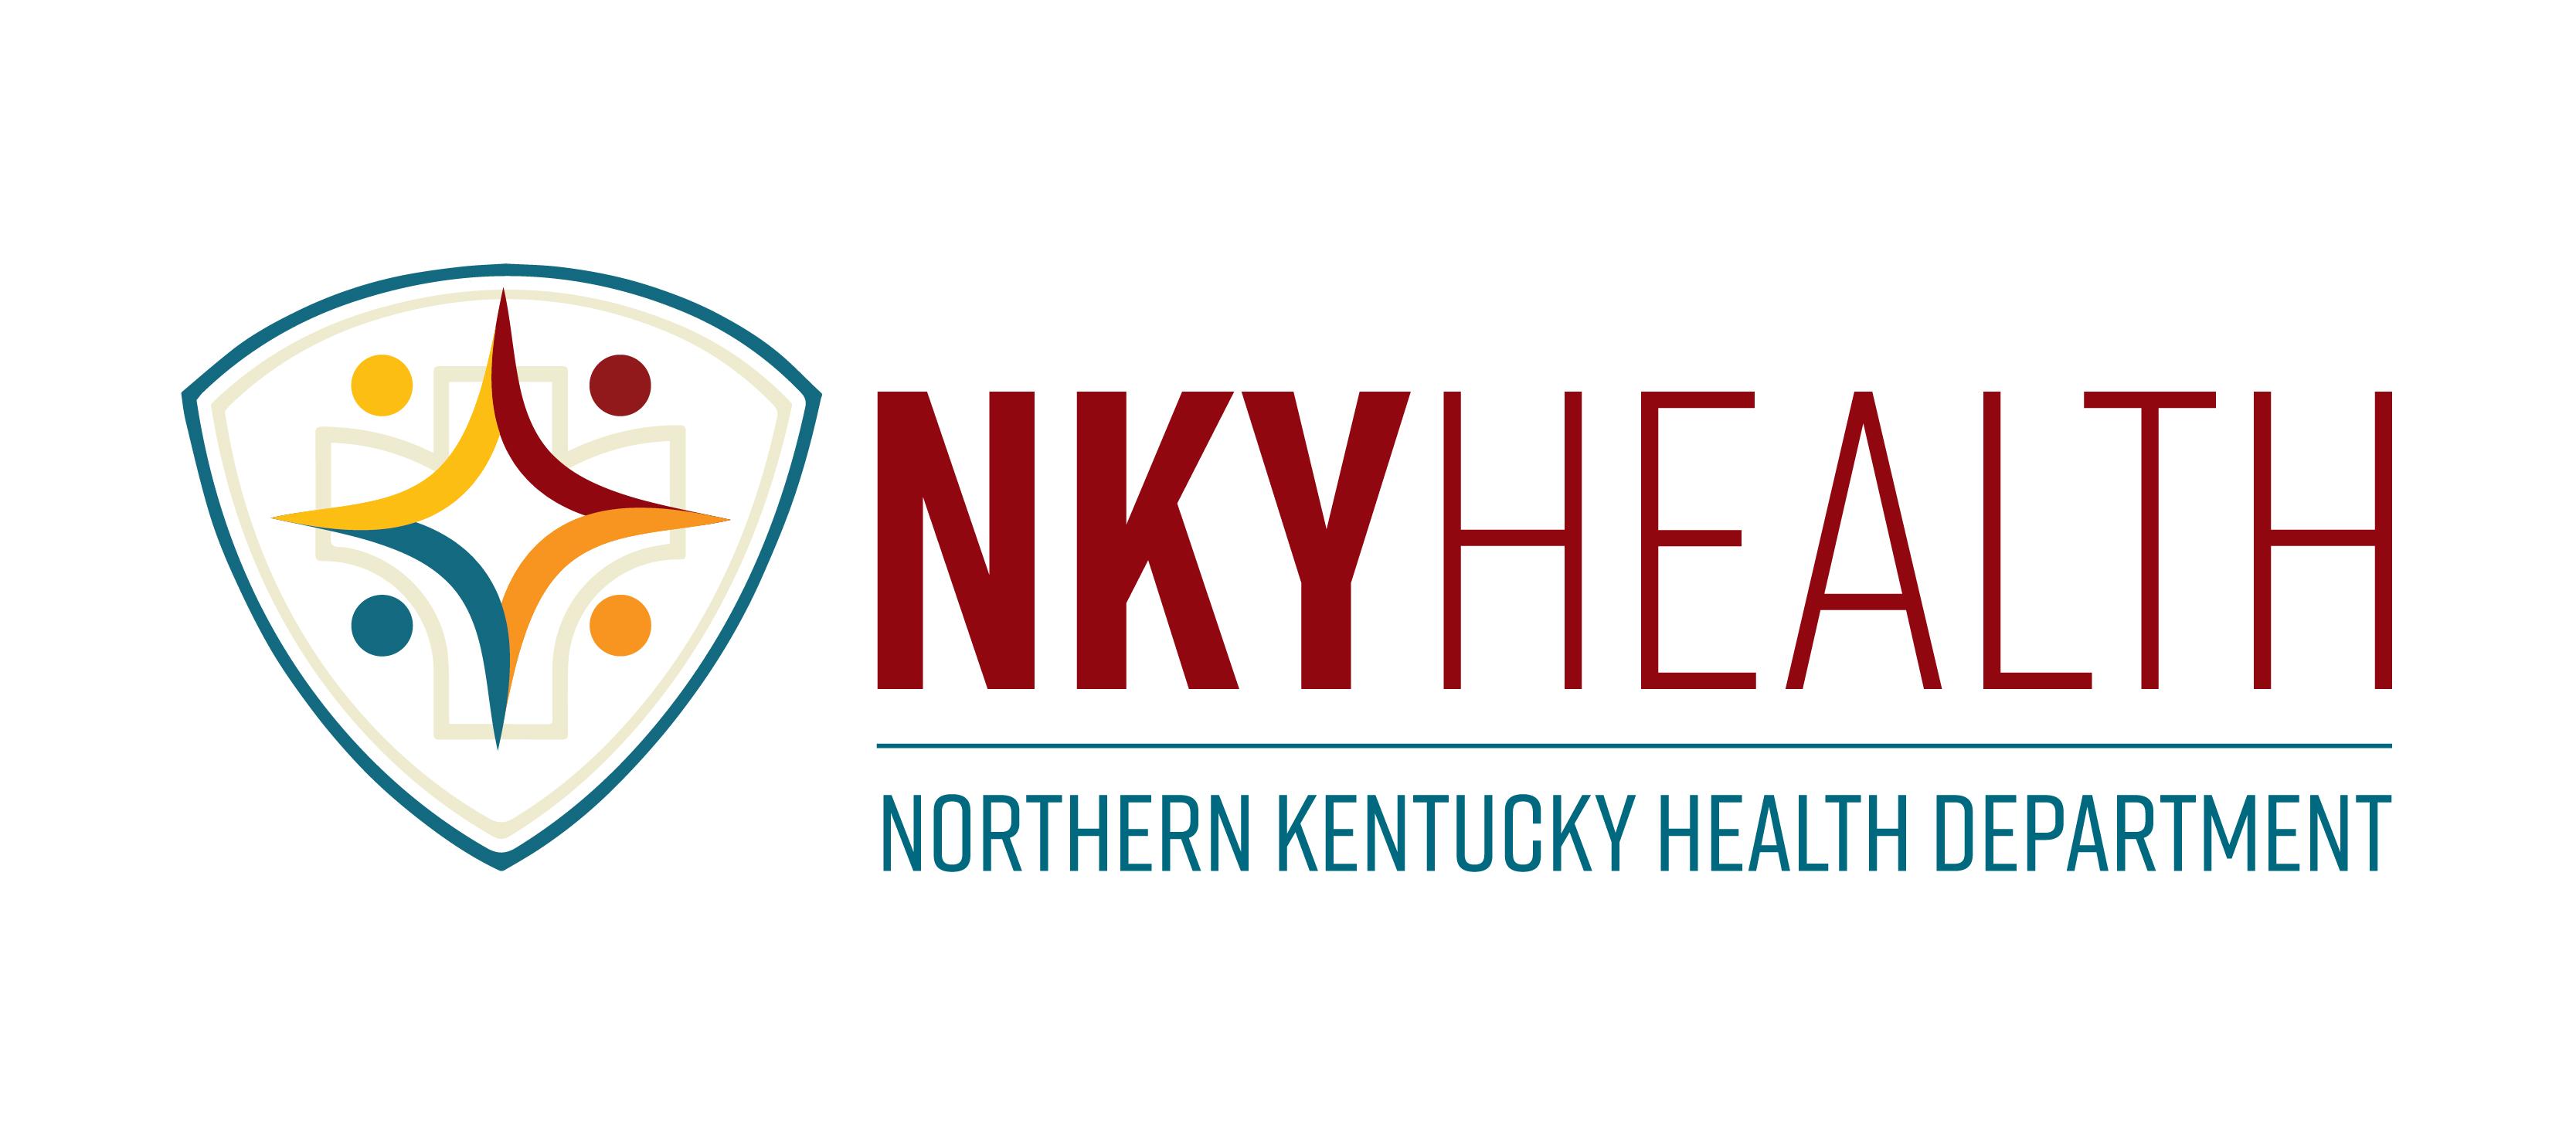 NKY Health April 13, 2020 Food Manager Certification Class - PM Class